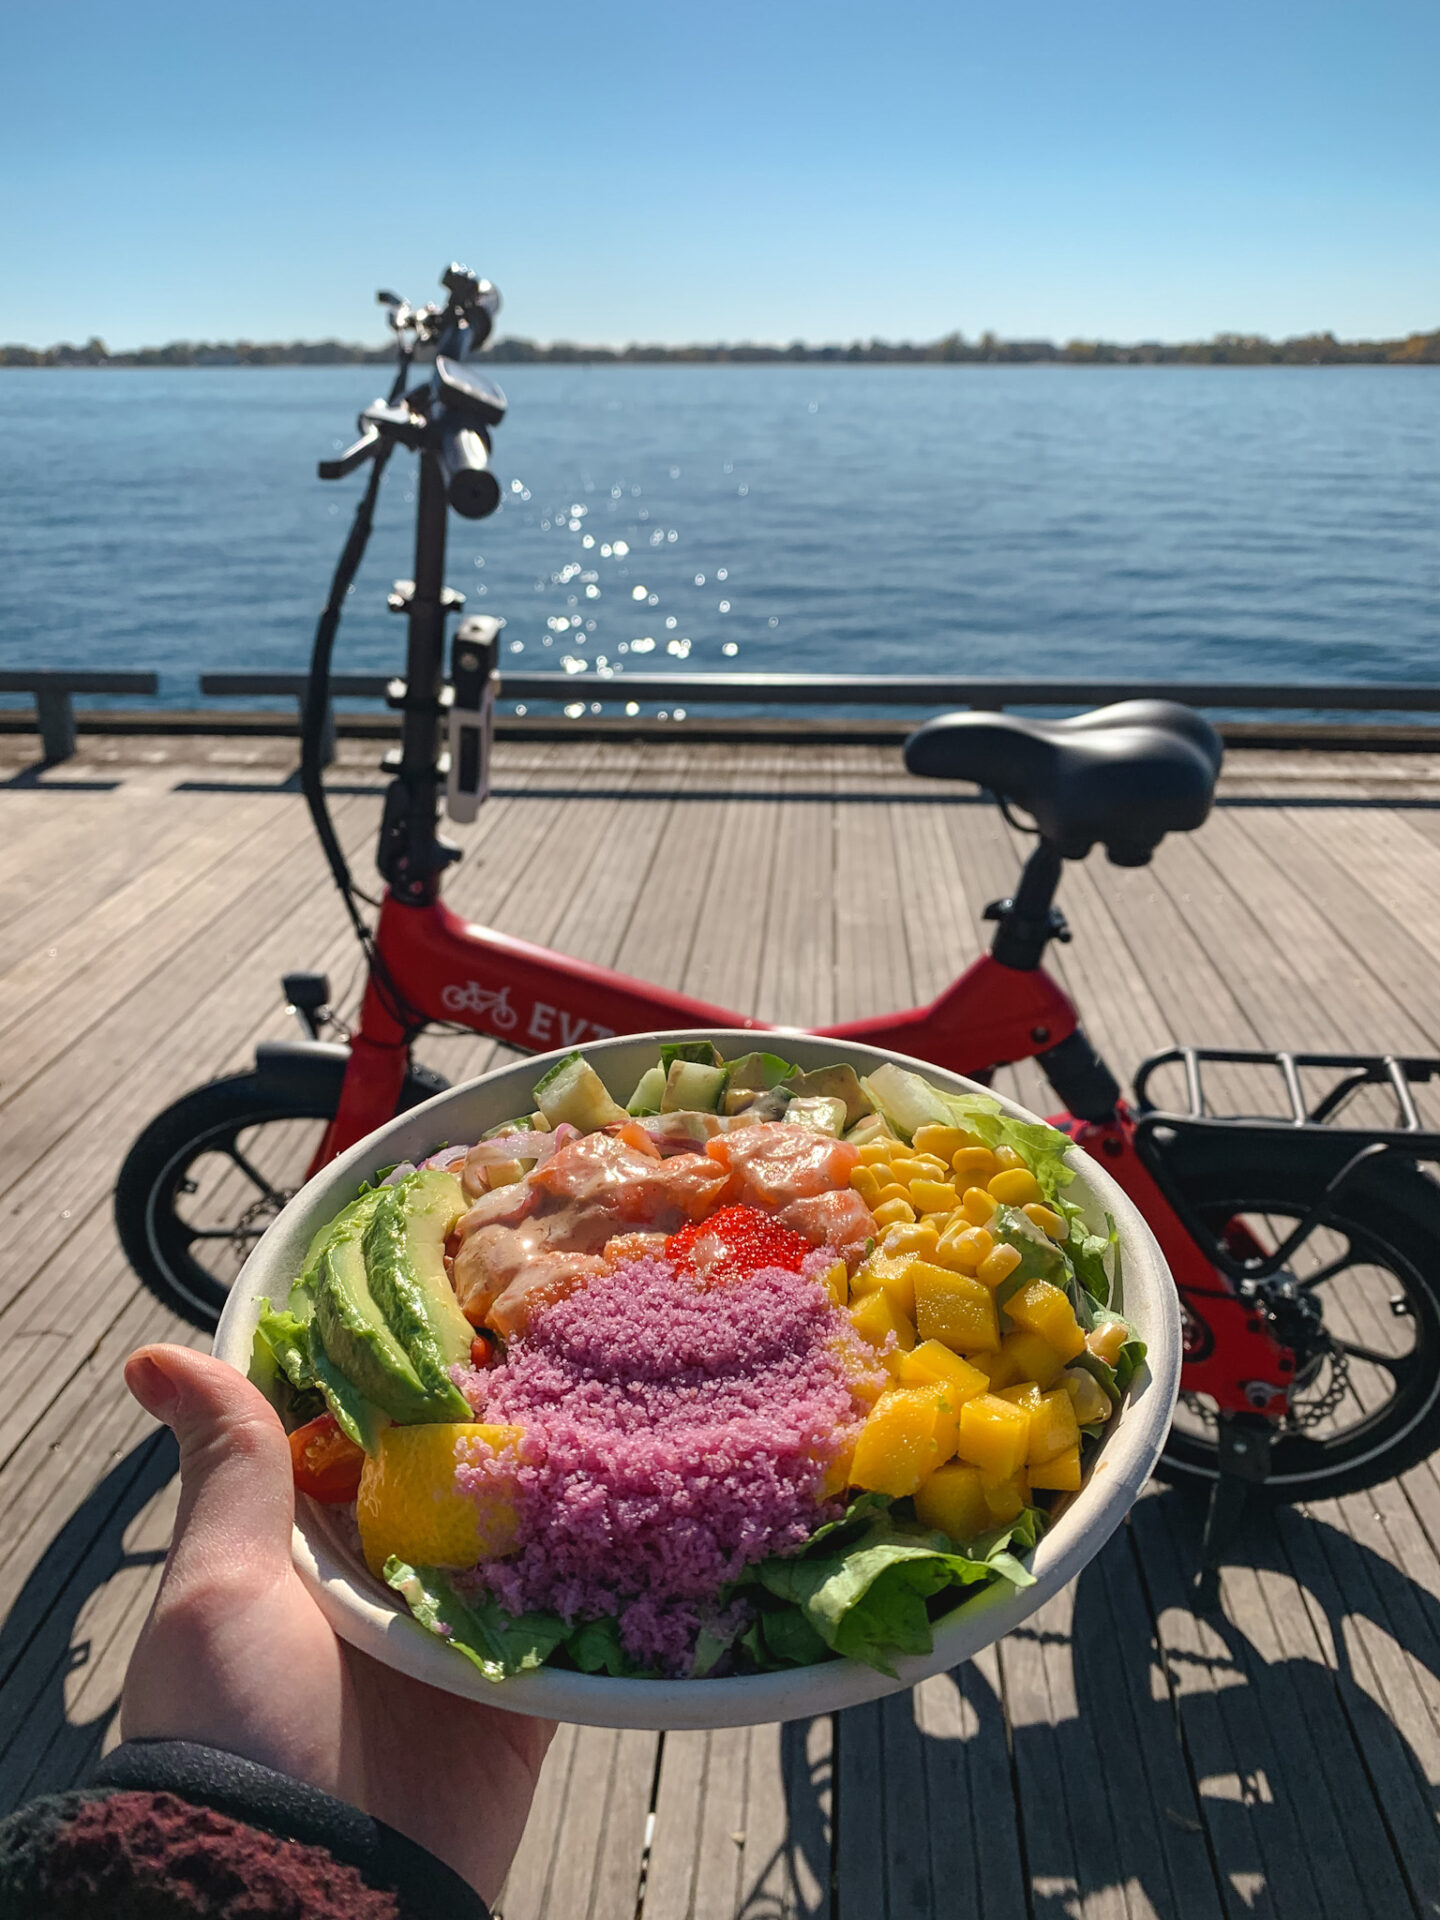 Rolltation picnic at the Toronto Harbourfront